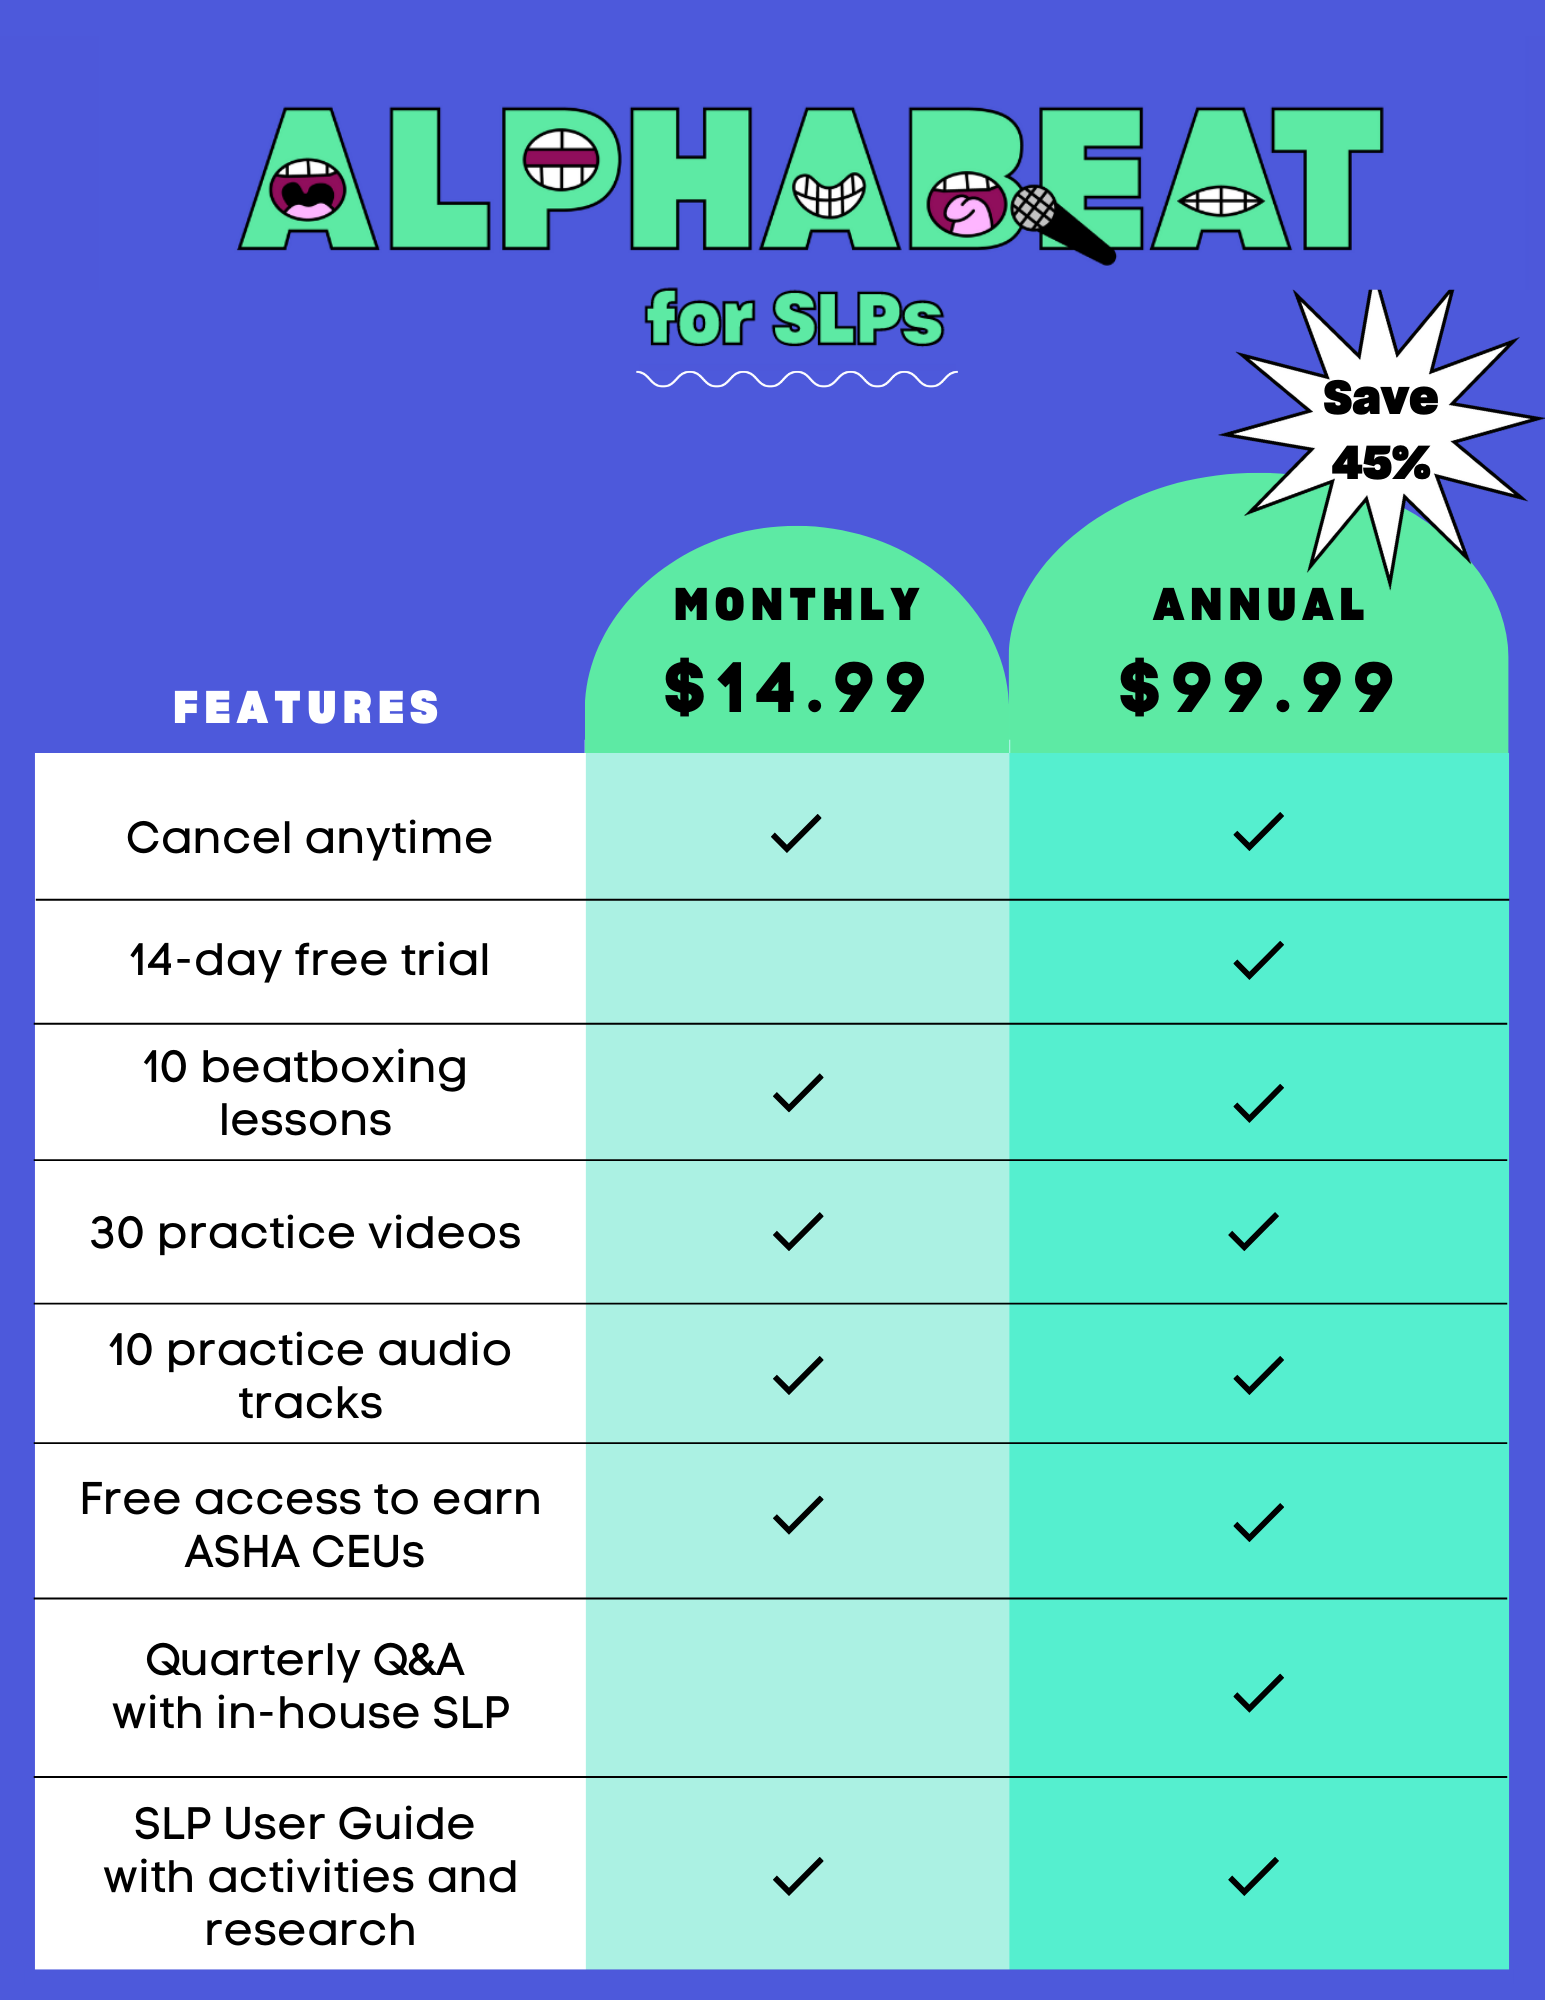 Alphabeat for SLPs pricing and features chart. The Alphabeat logo is green, and everything is on a blue-purple background. The chart includes features listed in a white column, and the Monthly and Annual columns are green with check marks that show which features each version includes. The Monthly version is priced at $14.99/month and includes the following features: Cancel anytime; 10 beatboxing lessons; 30 practice videos; 10 practice audio tracks; Free access to earn ASHA CEUs; and SLP User Guide with activities and research. The Annual version is priced at $99.99/year, and includes the same features as the Monthly version plus: 14-day free trial; and Quarterly Q&amp;amp;A with in-house SLP. There is a white star above the Annual column that reads, “Save 45%”.